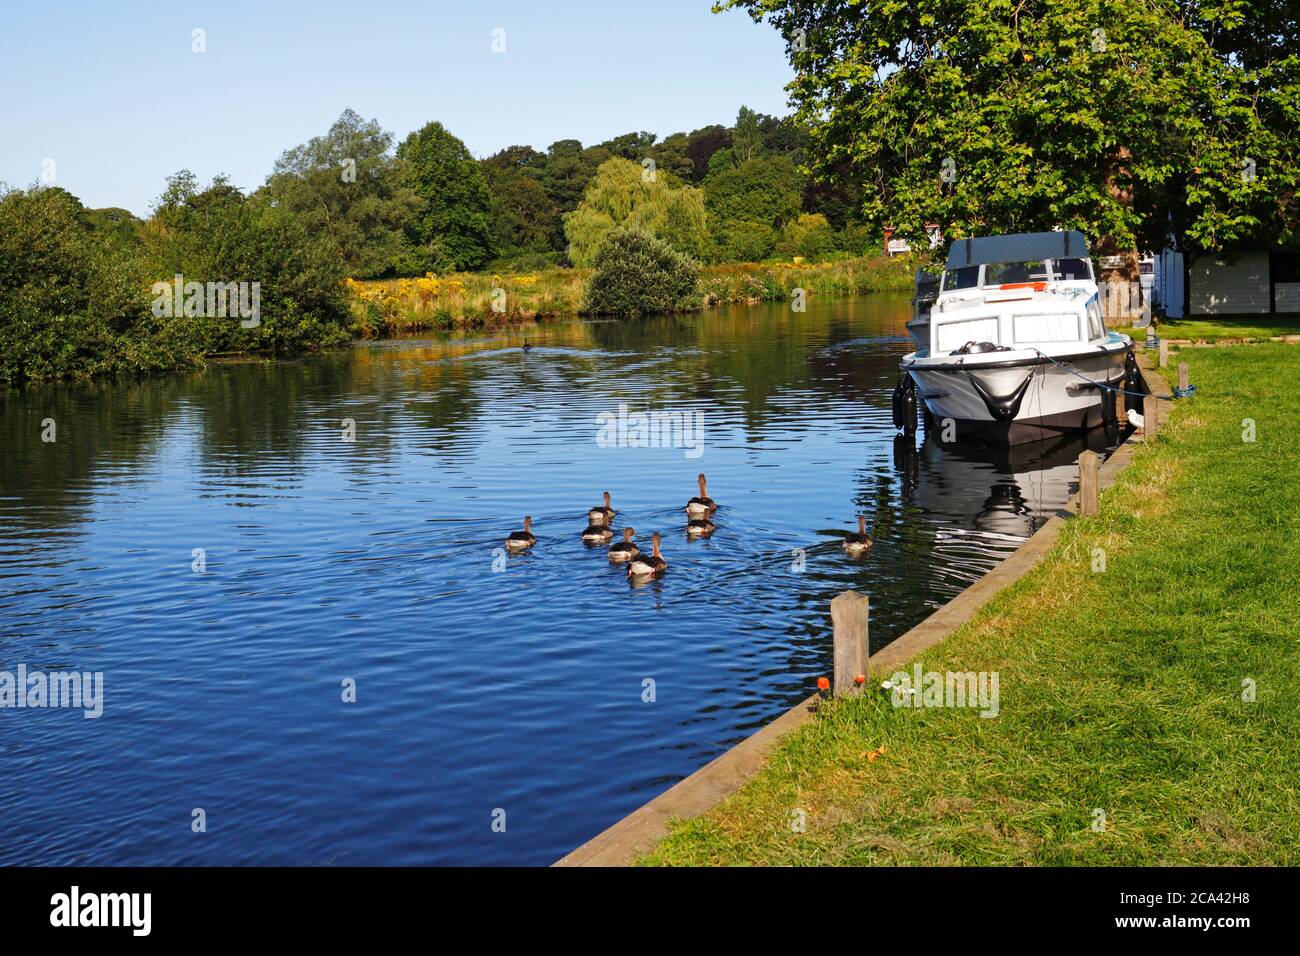 A view of the River Bure at Coltishall Common on the Norfolk Broads at Coltishall, Norfolk, England, United Kingdom. Stock Photo